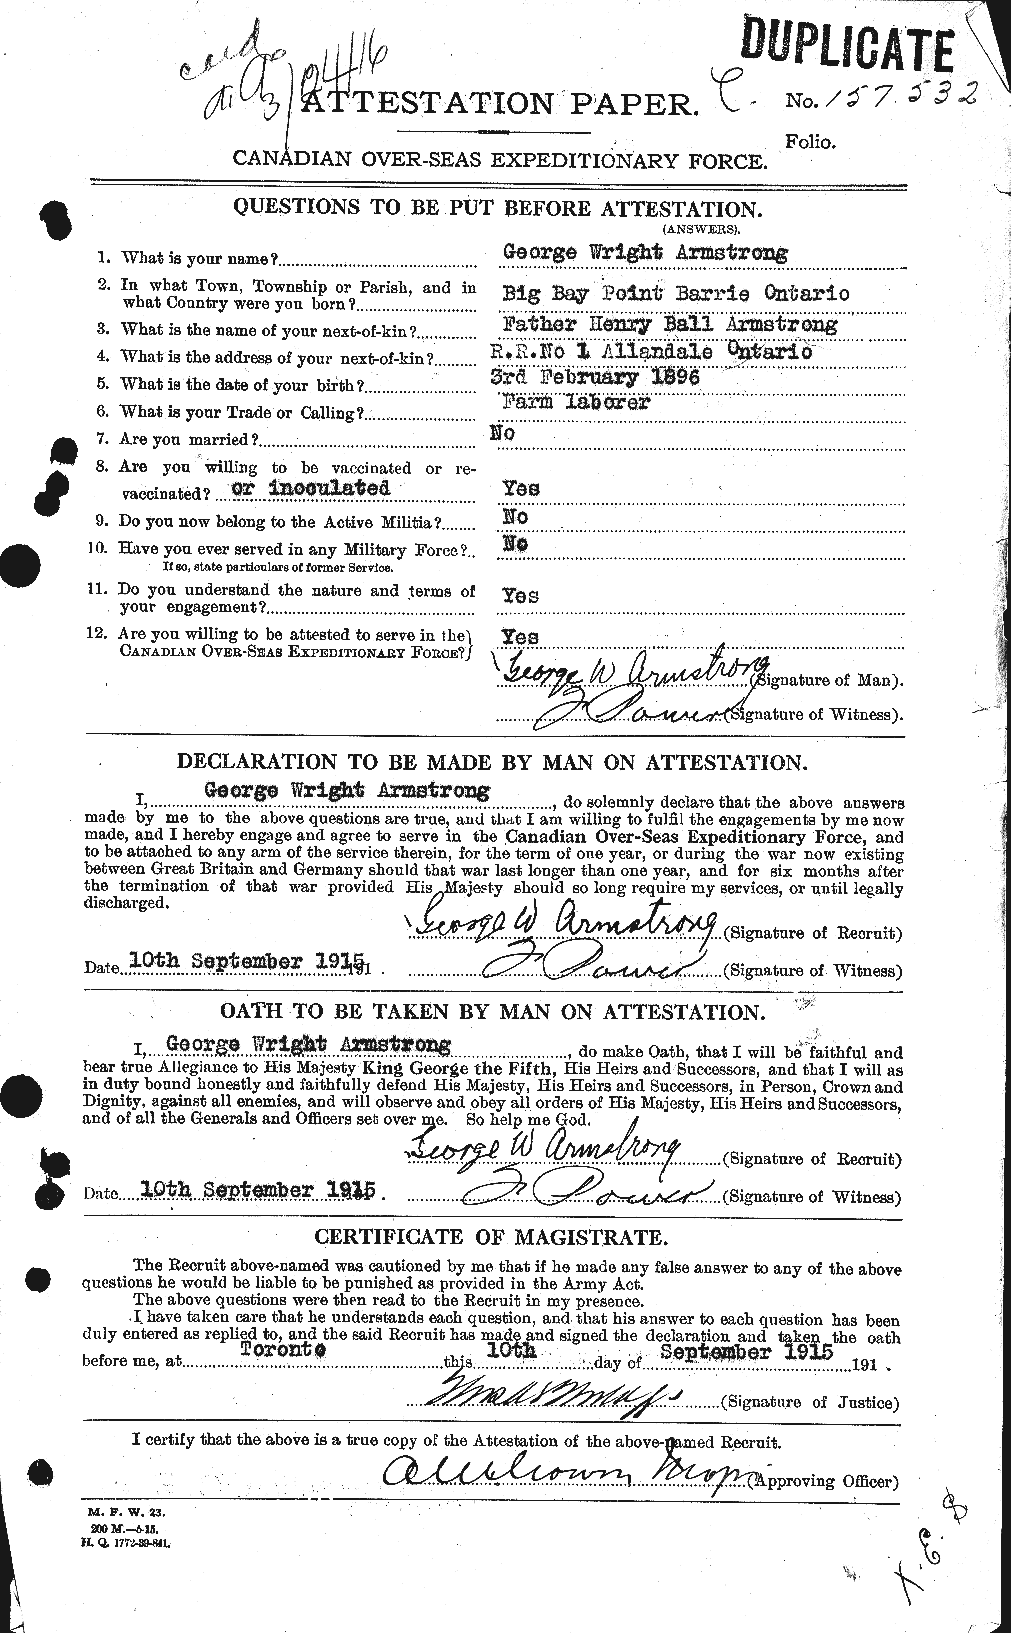 Personnel Records of the First World War - CEF 213699a